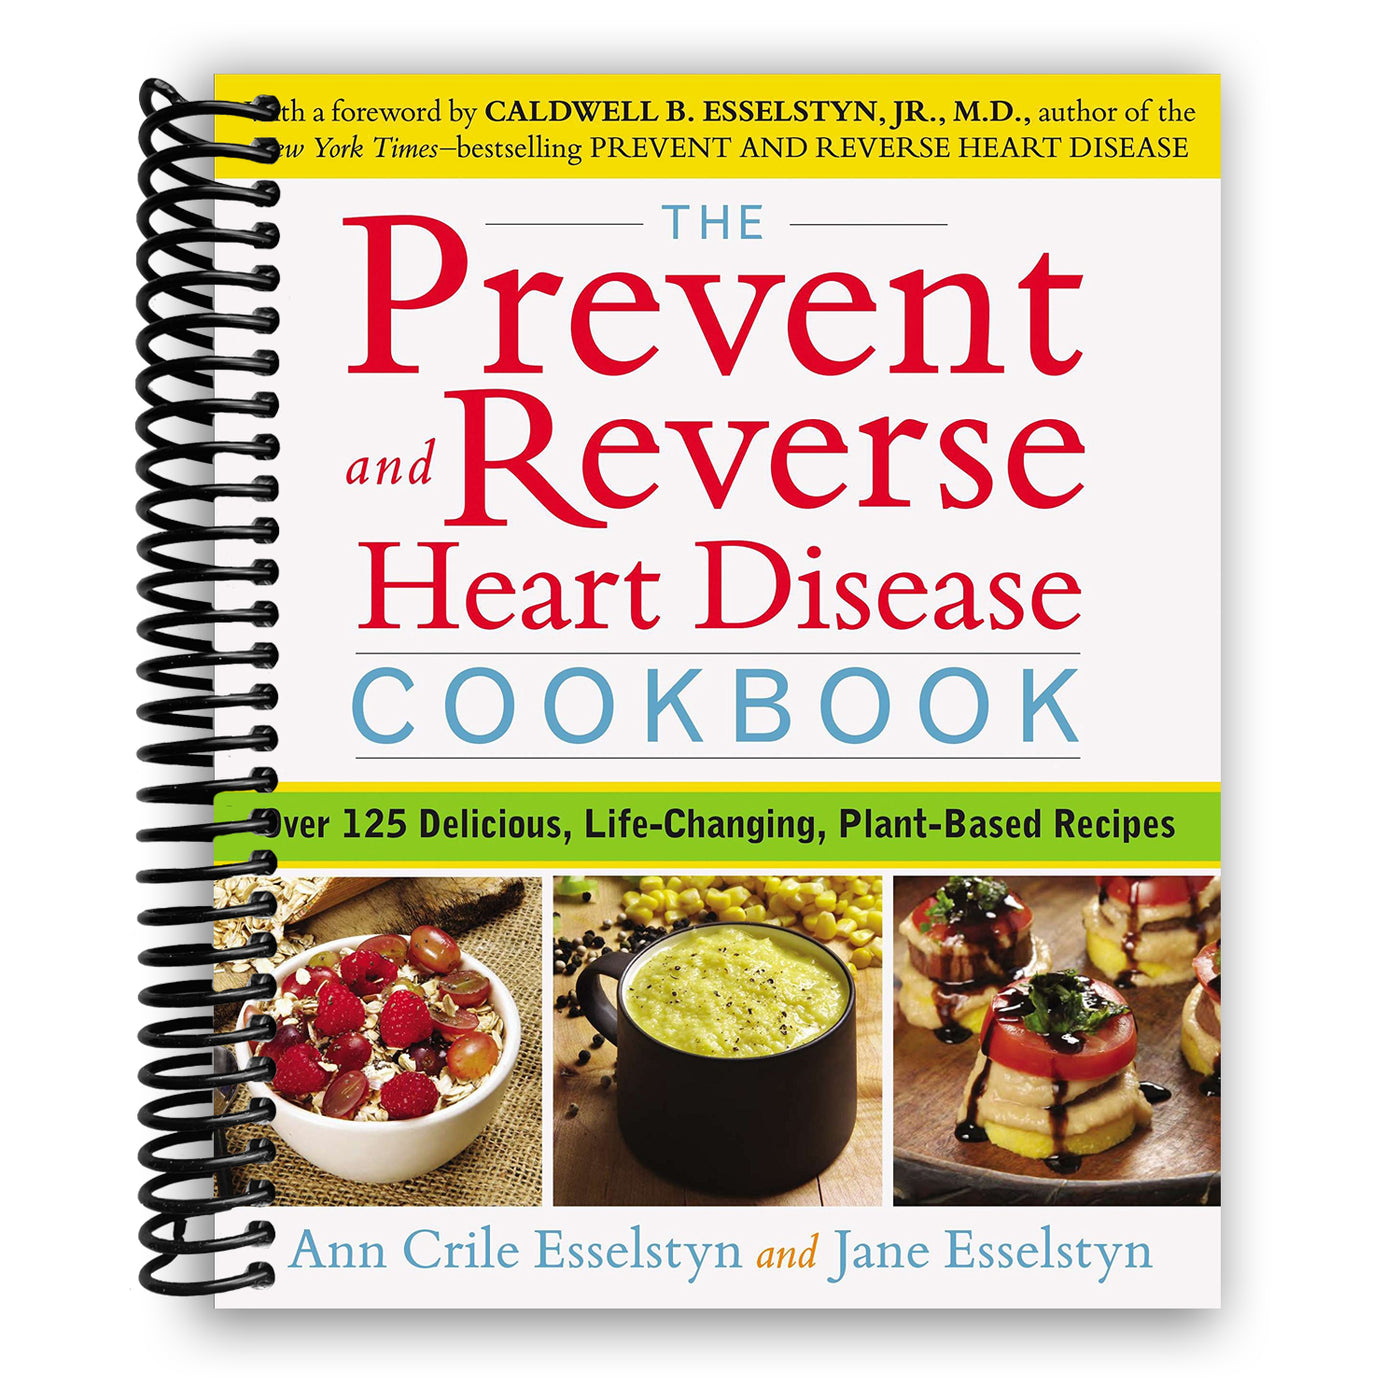 The Prevent and Reverse Heart Disease Cookbook: Over 125 Delicious, Life-Changing, Plant-Based Recipes (Spiral Bound)